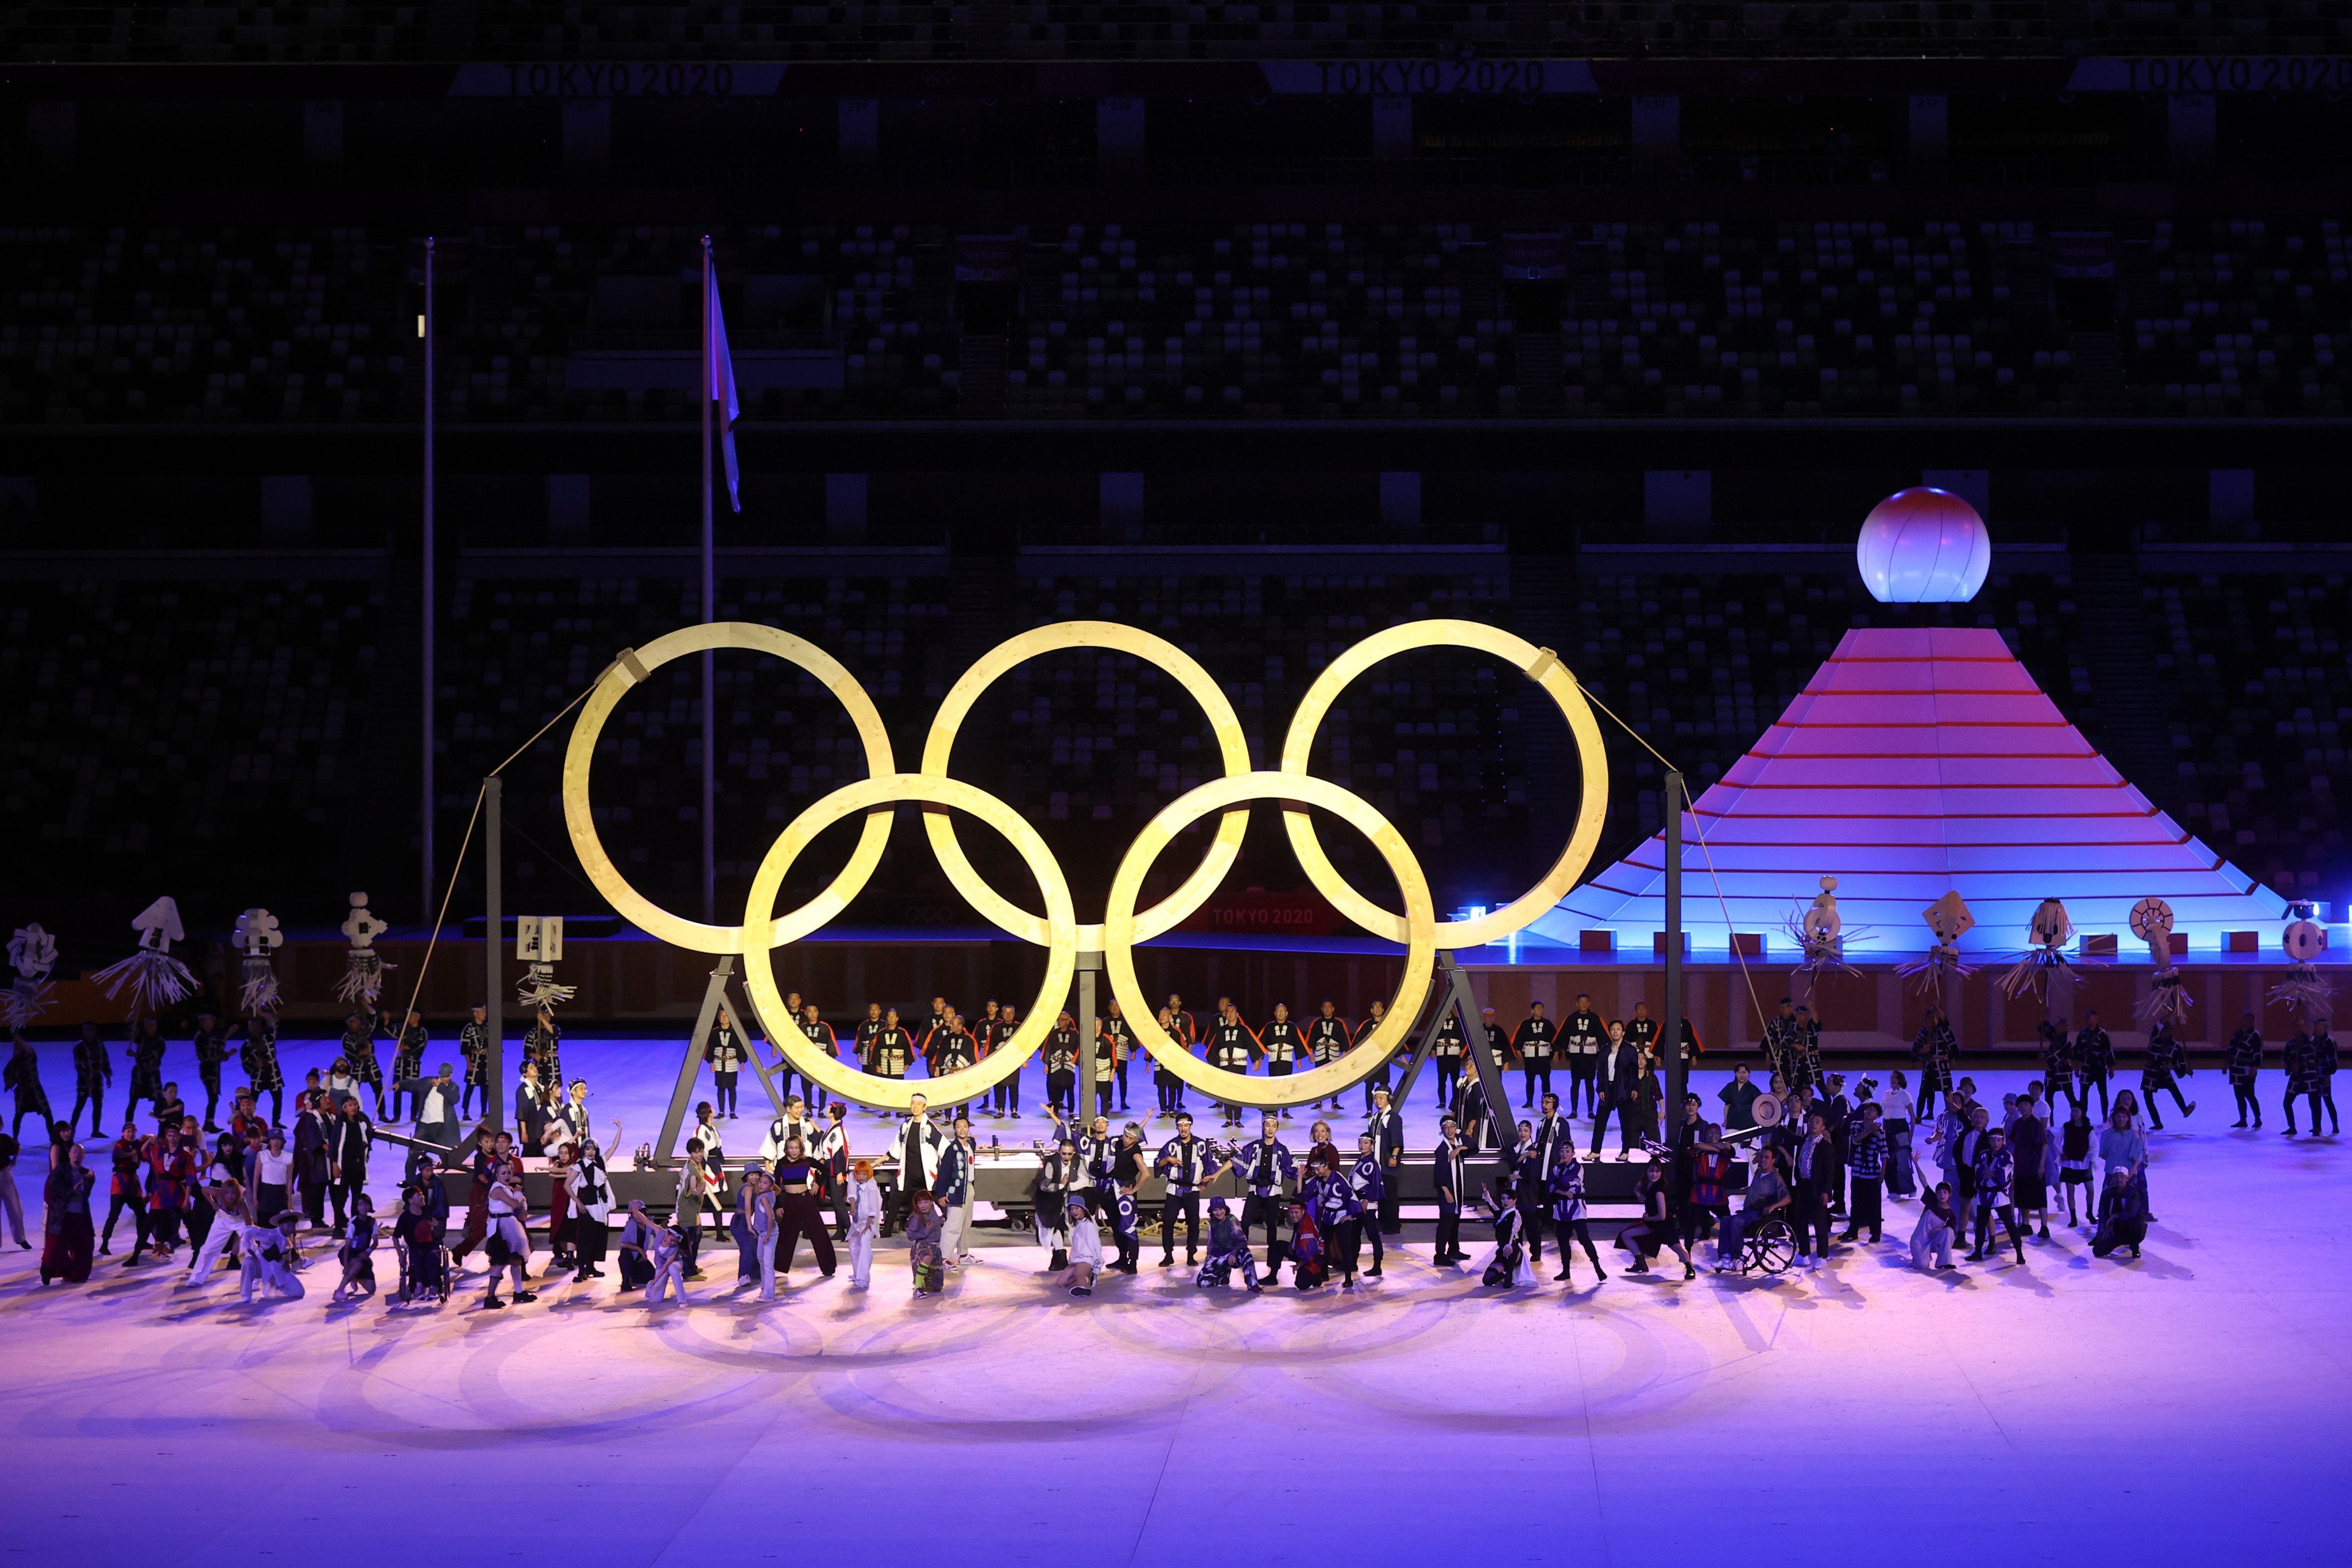 Russian, Belarusian athletes will not take part in Olympics opening ceremony  - IOC